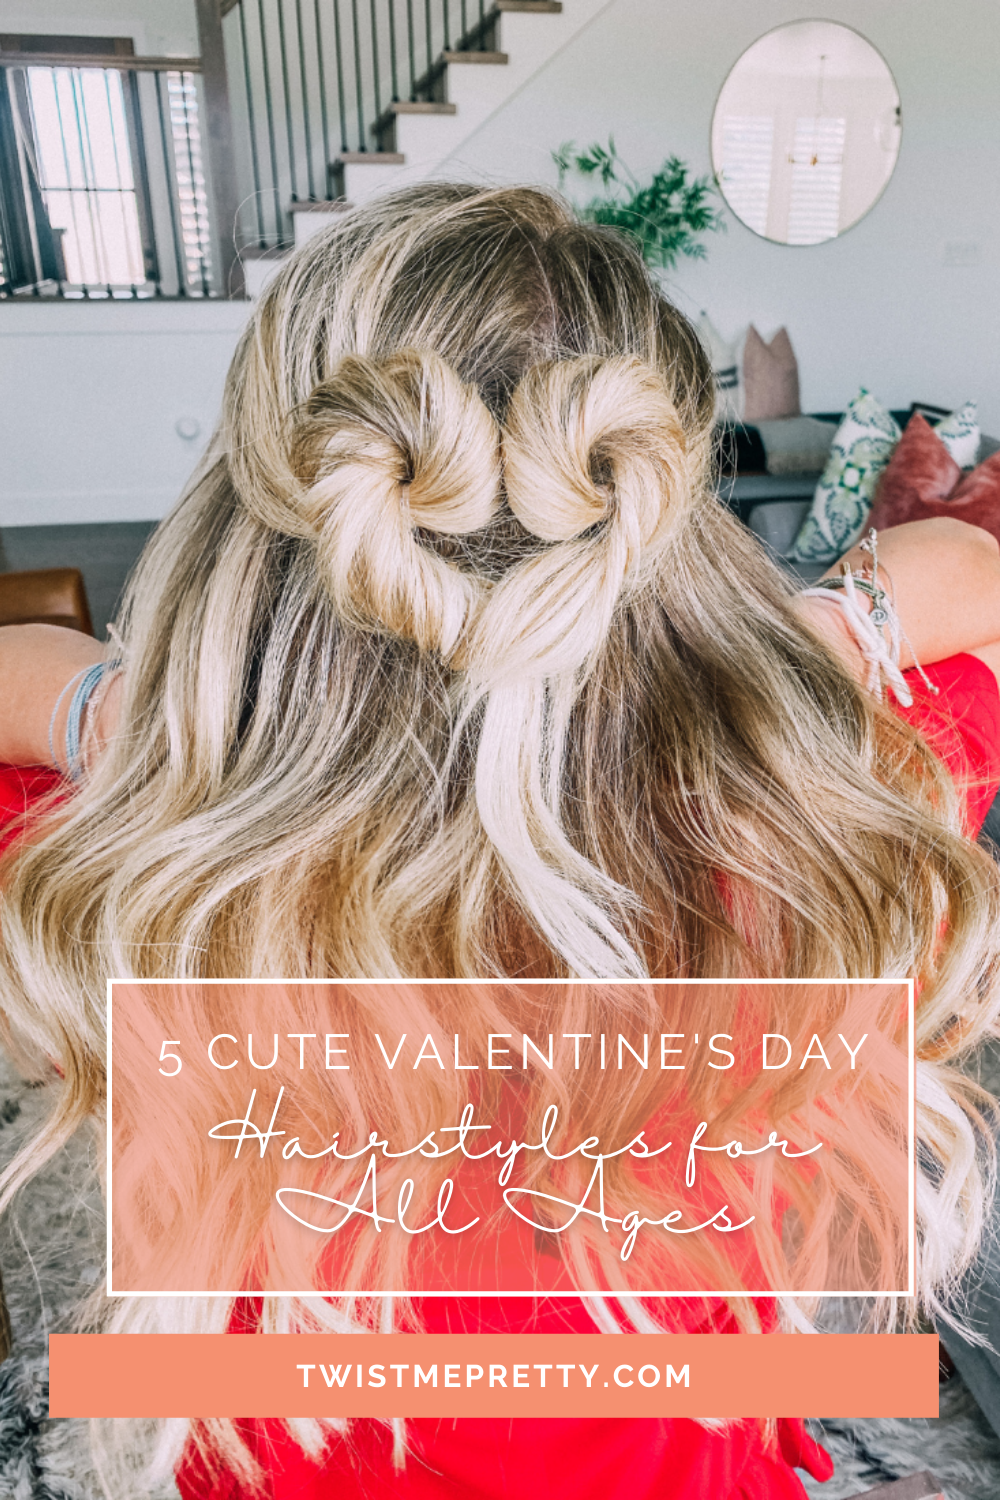 cute and easy valentine's hairstyles. www.twistmepretty.com